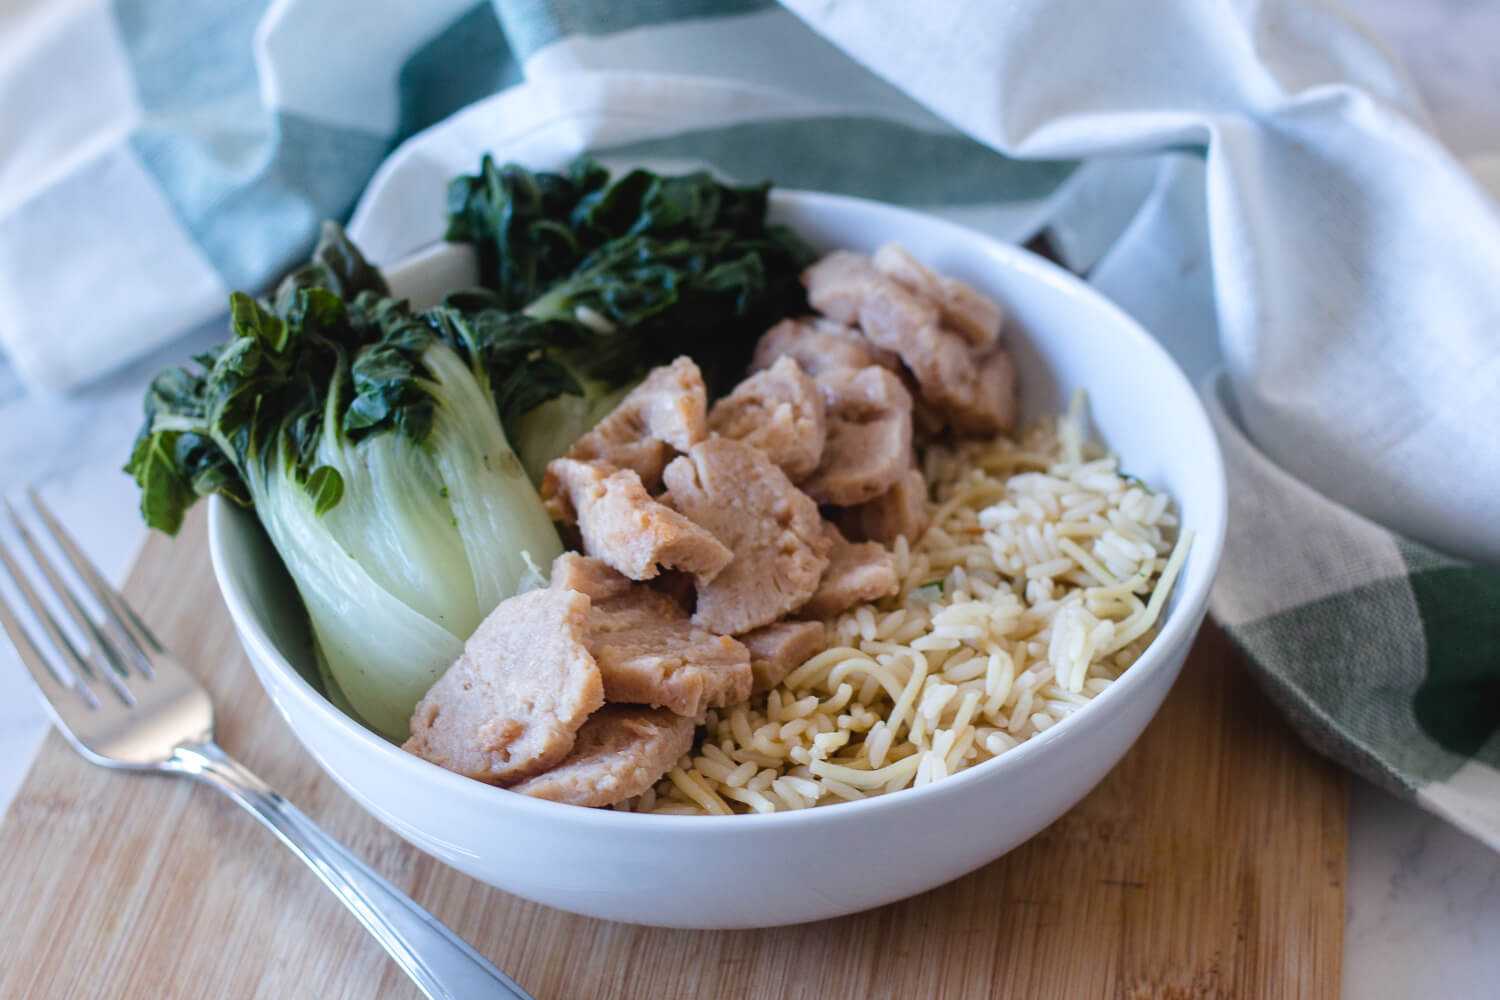 Seitan chunks served with rice a roni and seamed bok choy